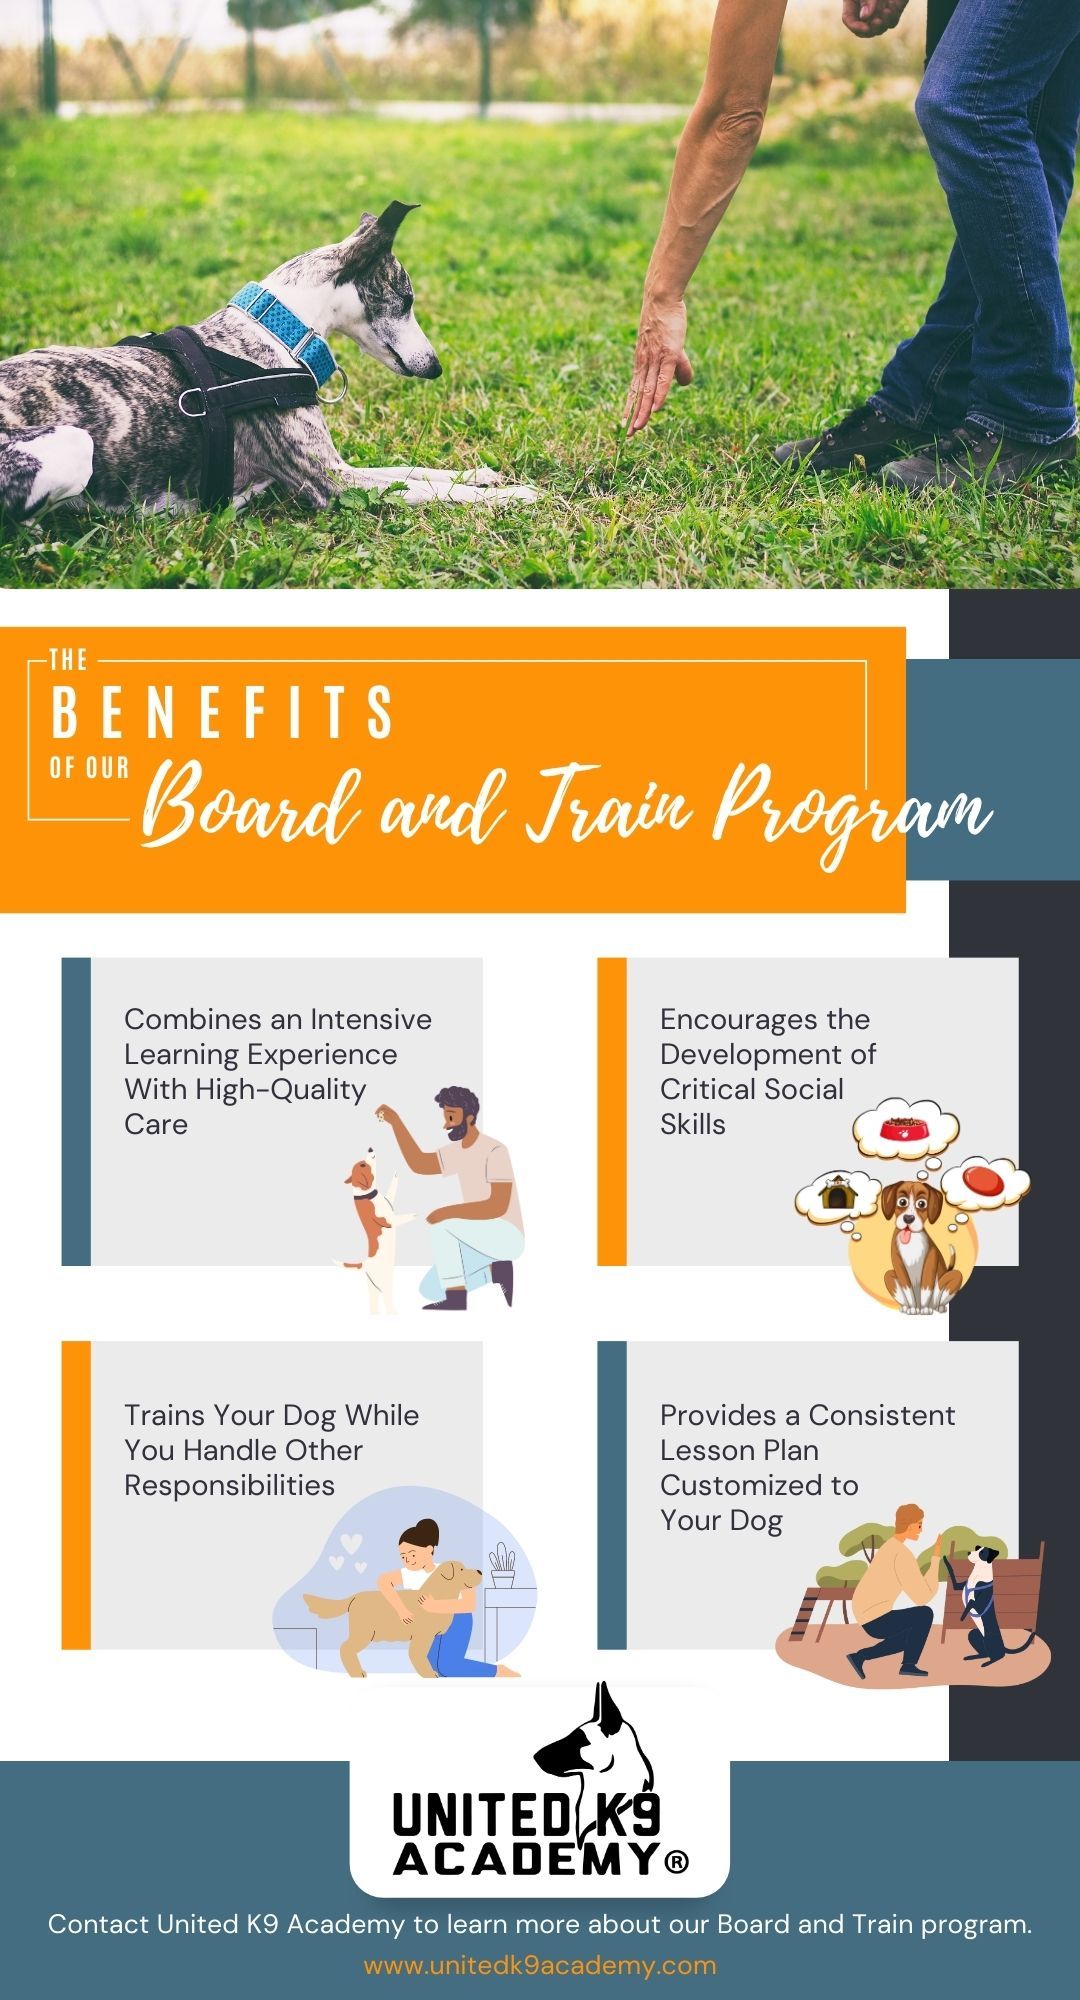 M37810 - Infographic - Reasons Why Boarding and Training May Be Necessary for Your Dog.jpg